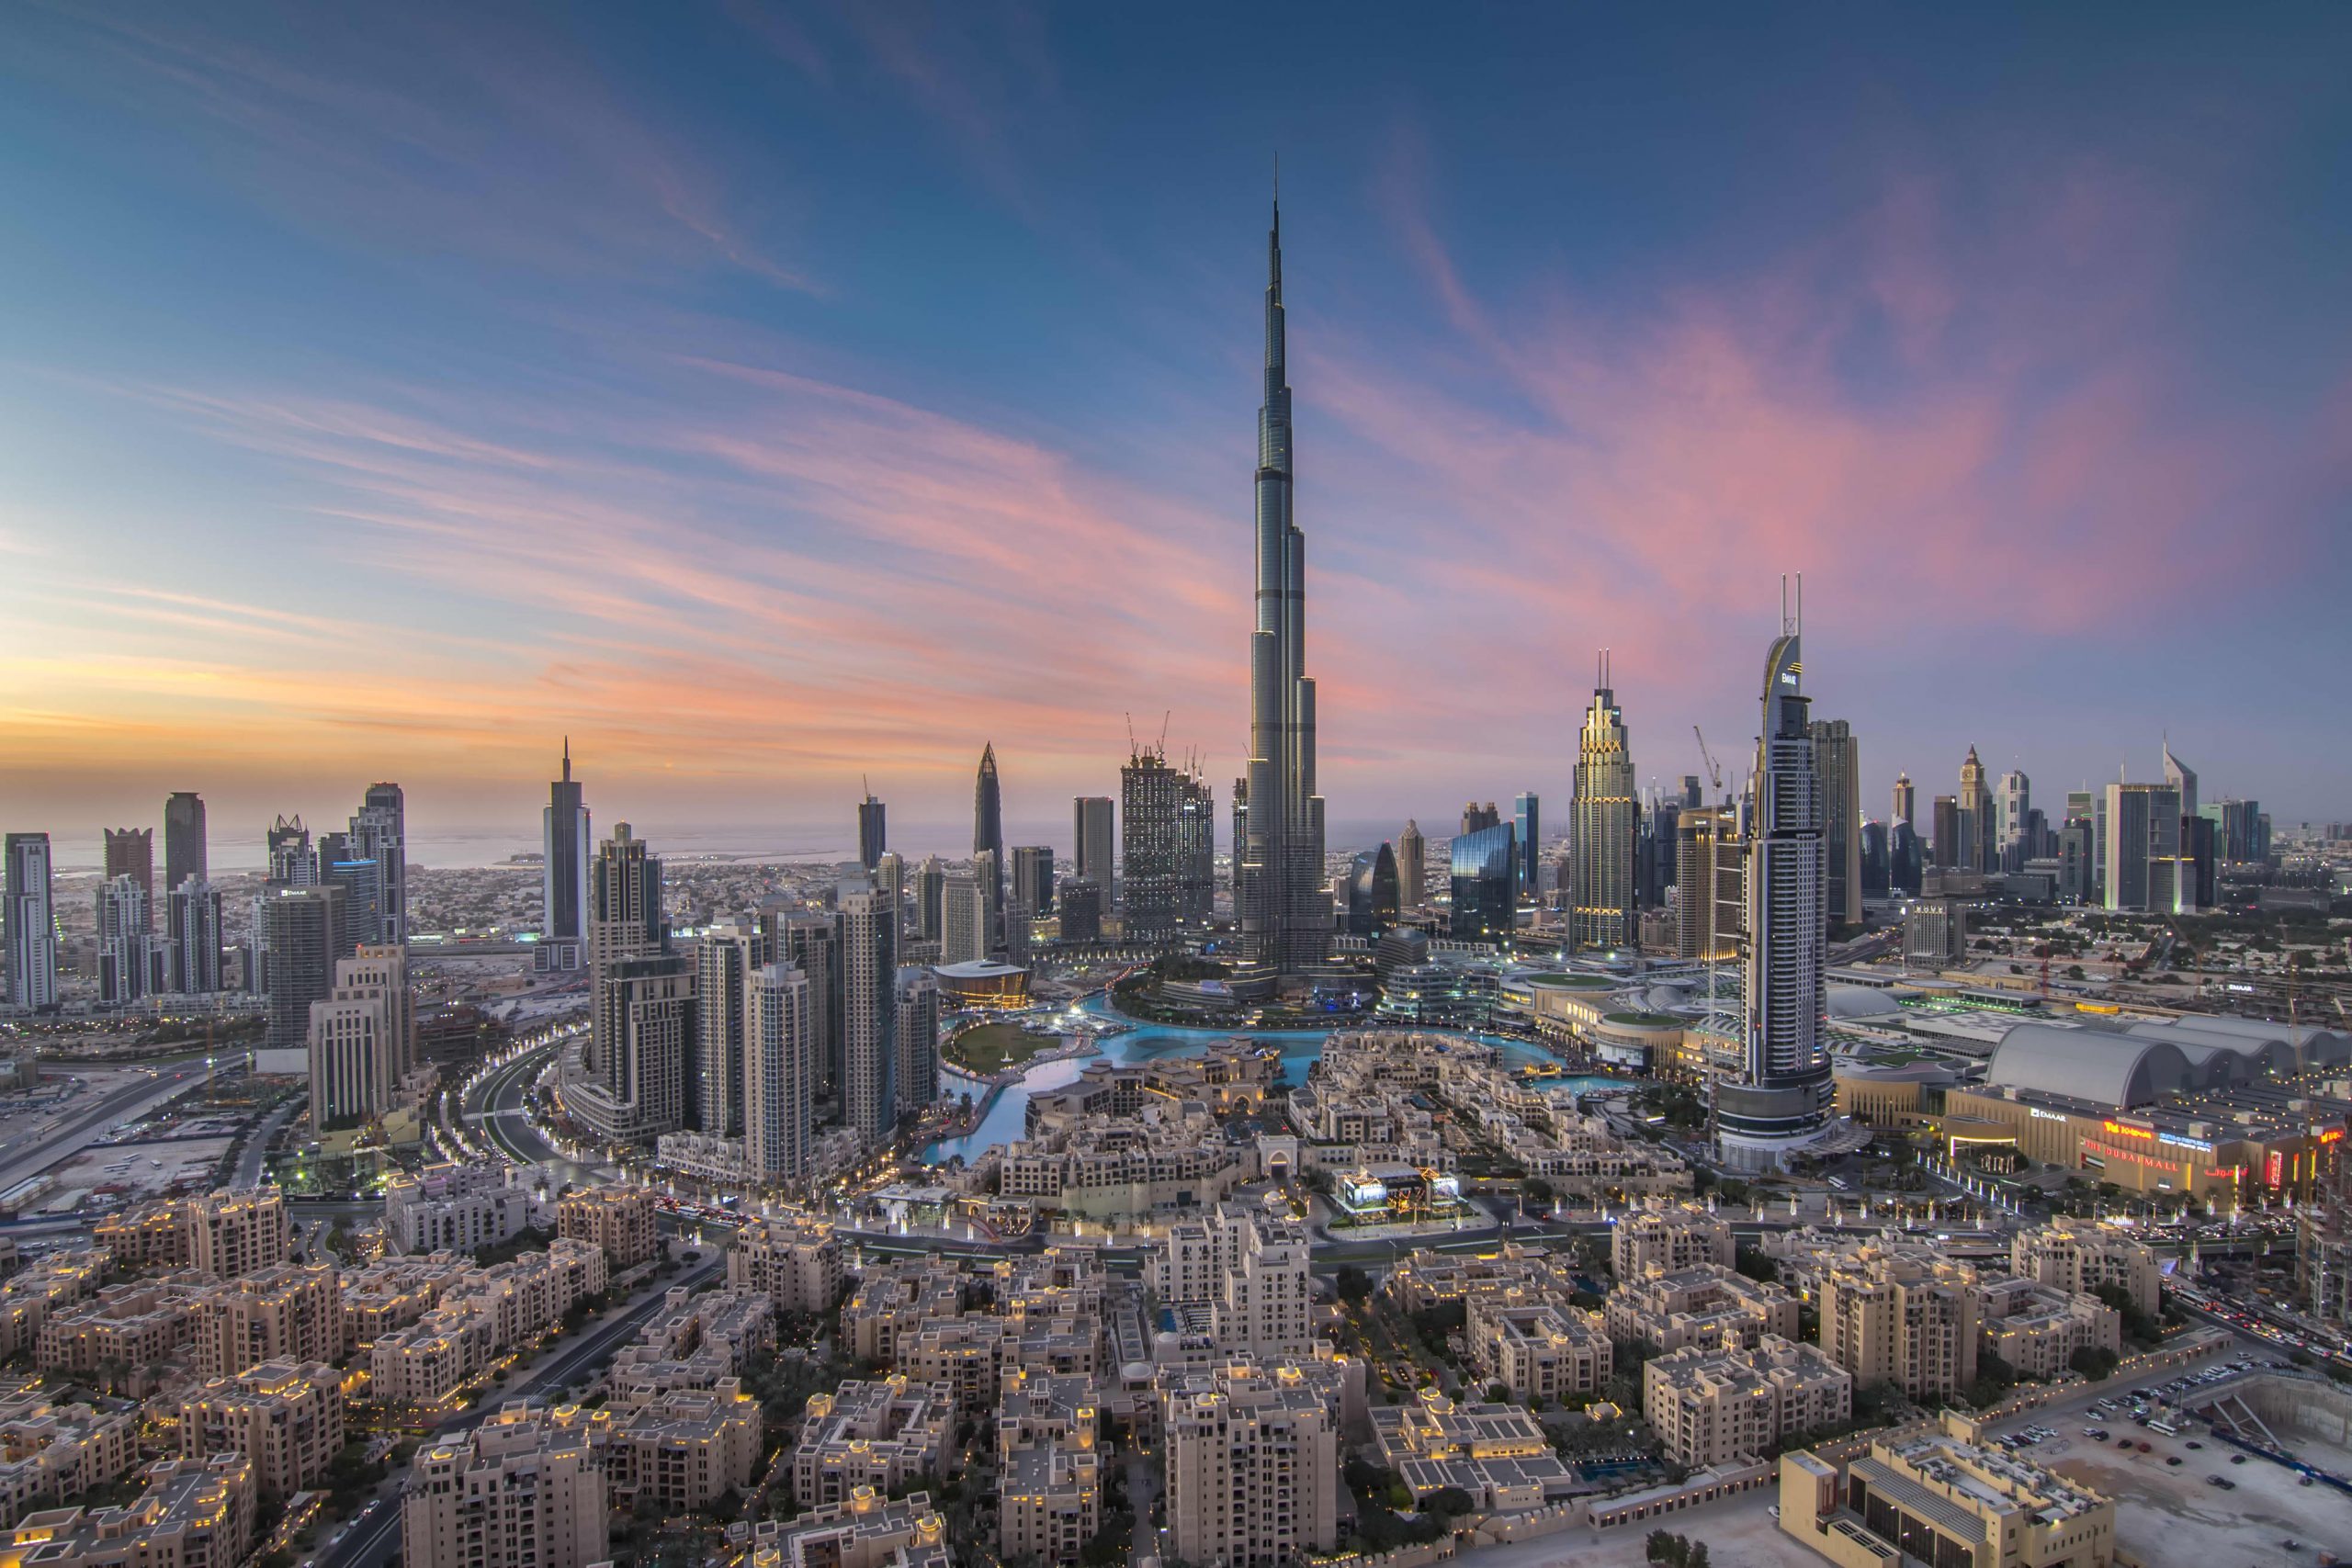 The UAE is providing citizenship to foreigners, sees financial potential